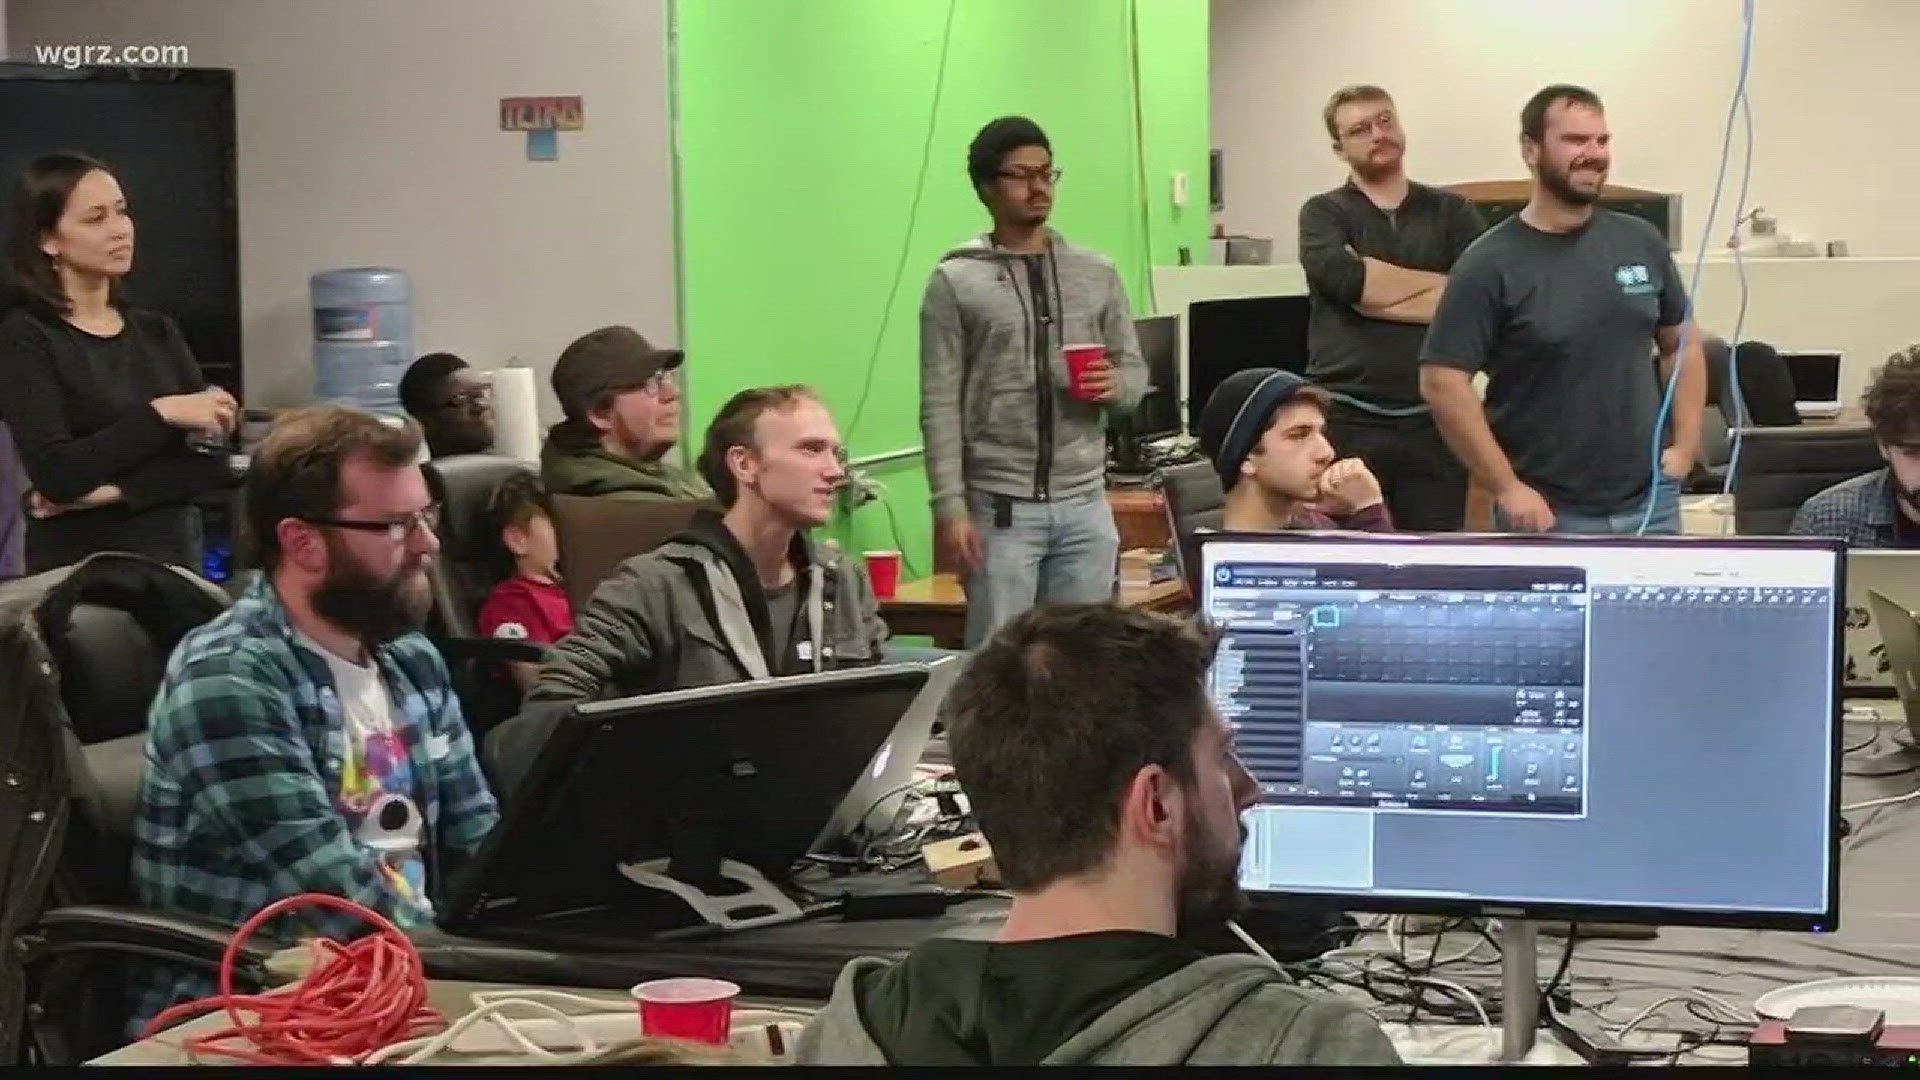 Buffalo Game Space offers a collection of artists, writers, musicians, coders, and other creative people, who want to pursue a career in the multi-billion-dollar video game industry